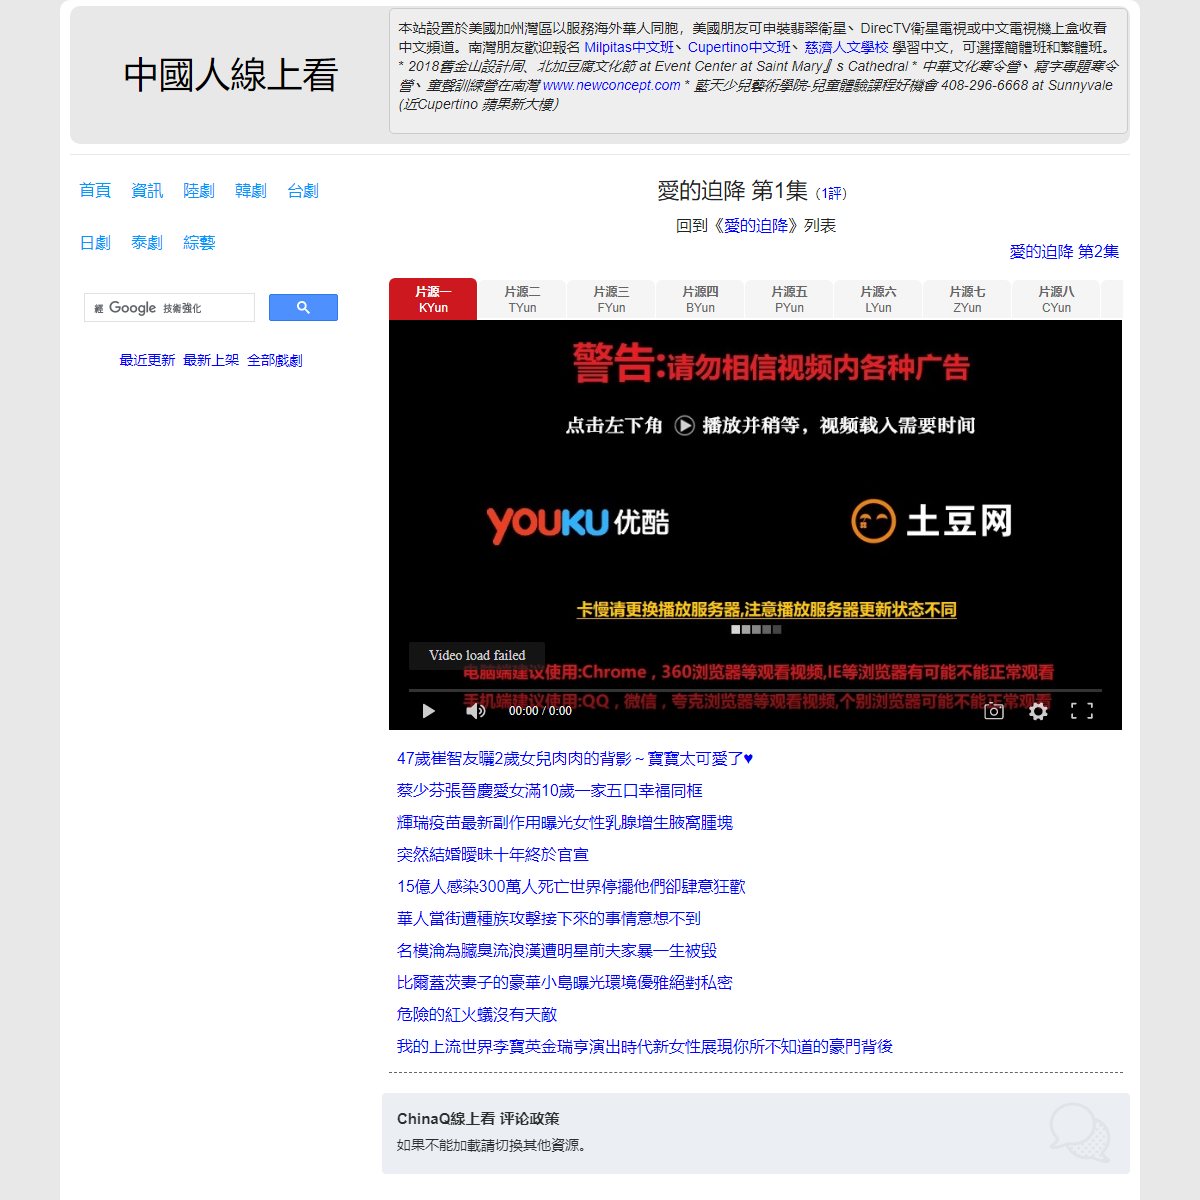 A complete backup of https://chinaq.tv/kr191214/1.html